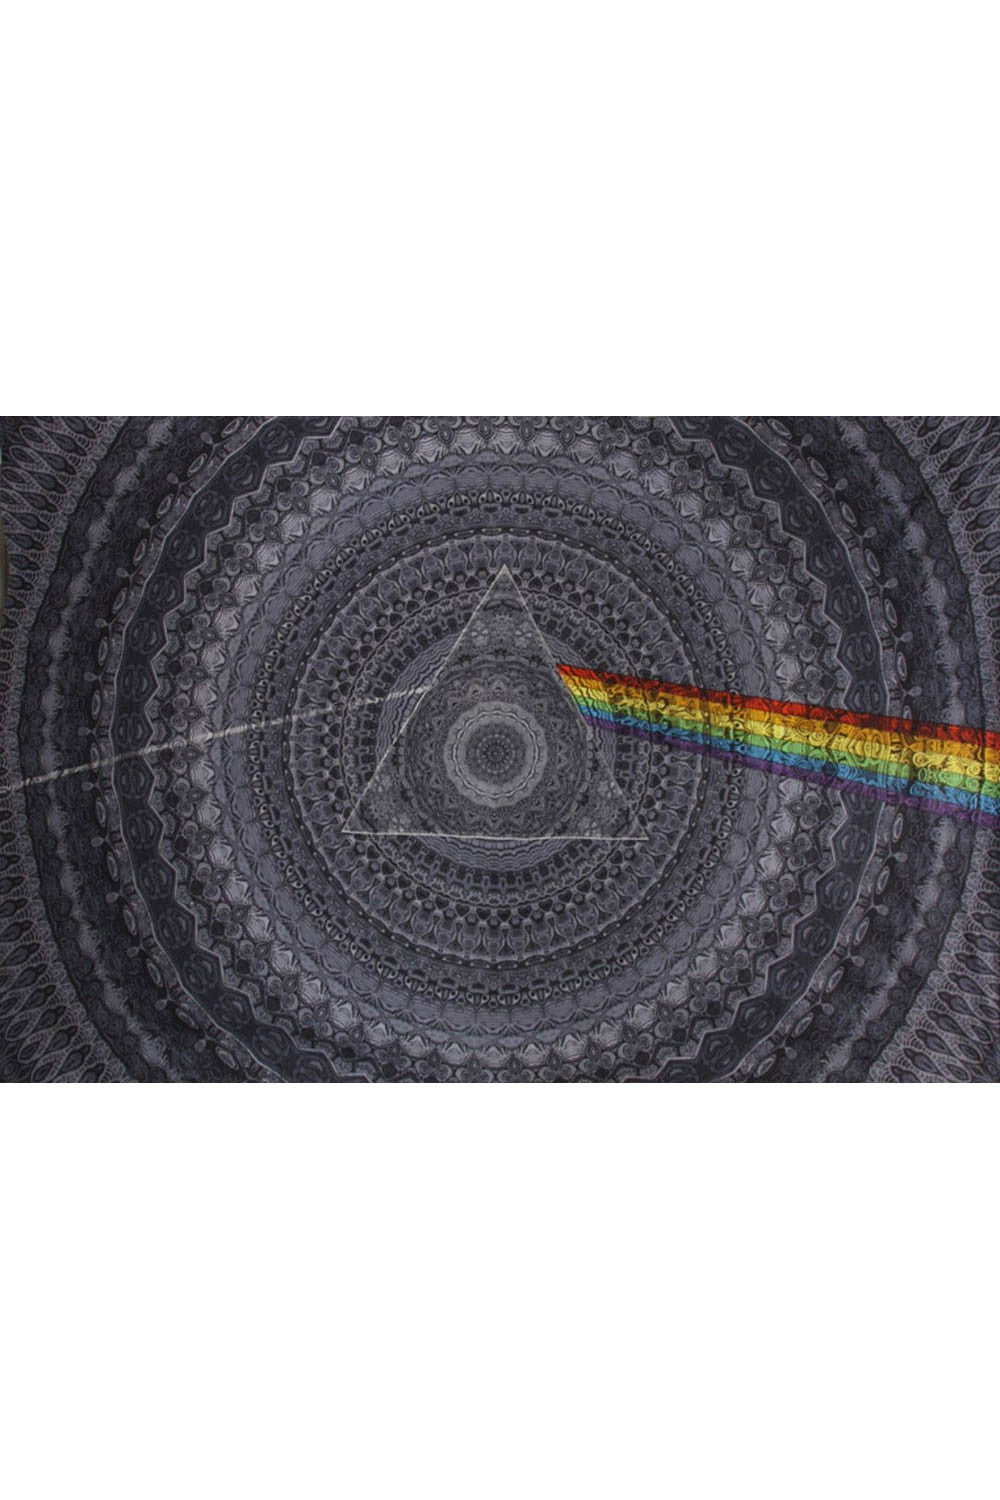 Tapestry - 3D Pink Floyd The Dark Side of the Moon Shadow Black Tapestry 60x90-hotRAGS.com